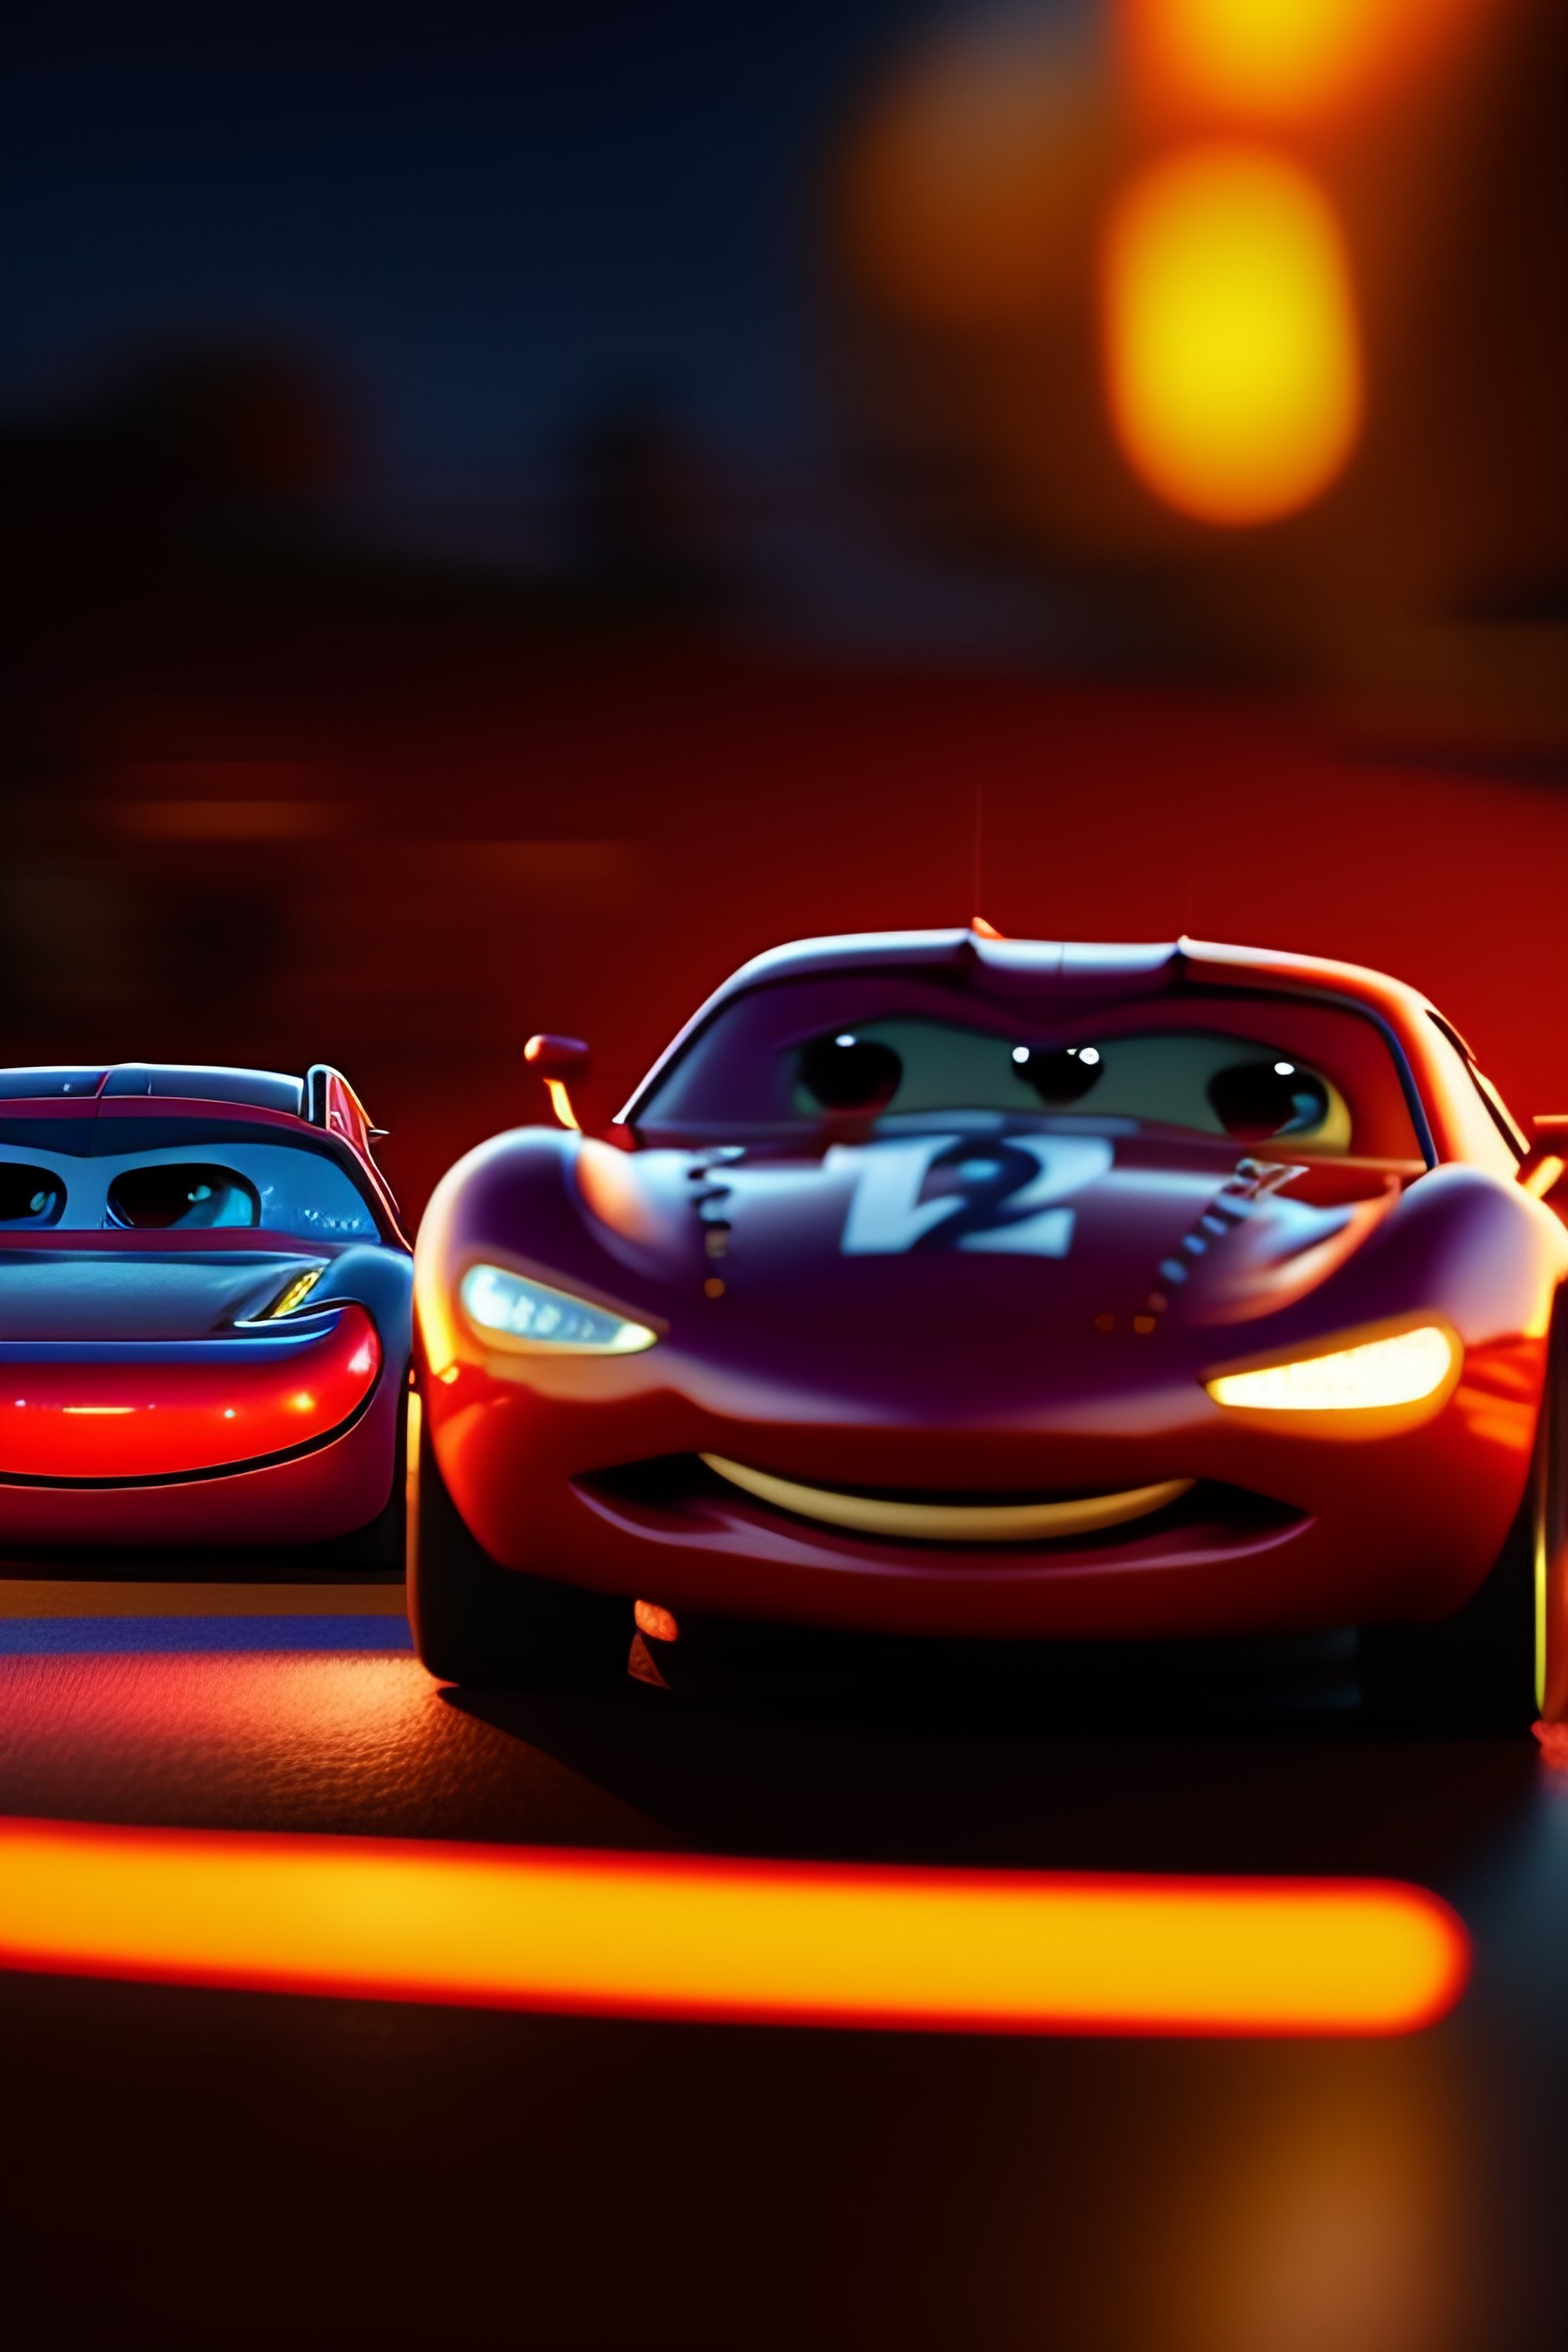 Vinn diesel and lightning mcqueen from cars 2 hugging, low photography, scene from the movie cars